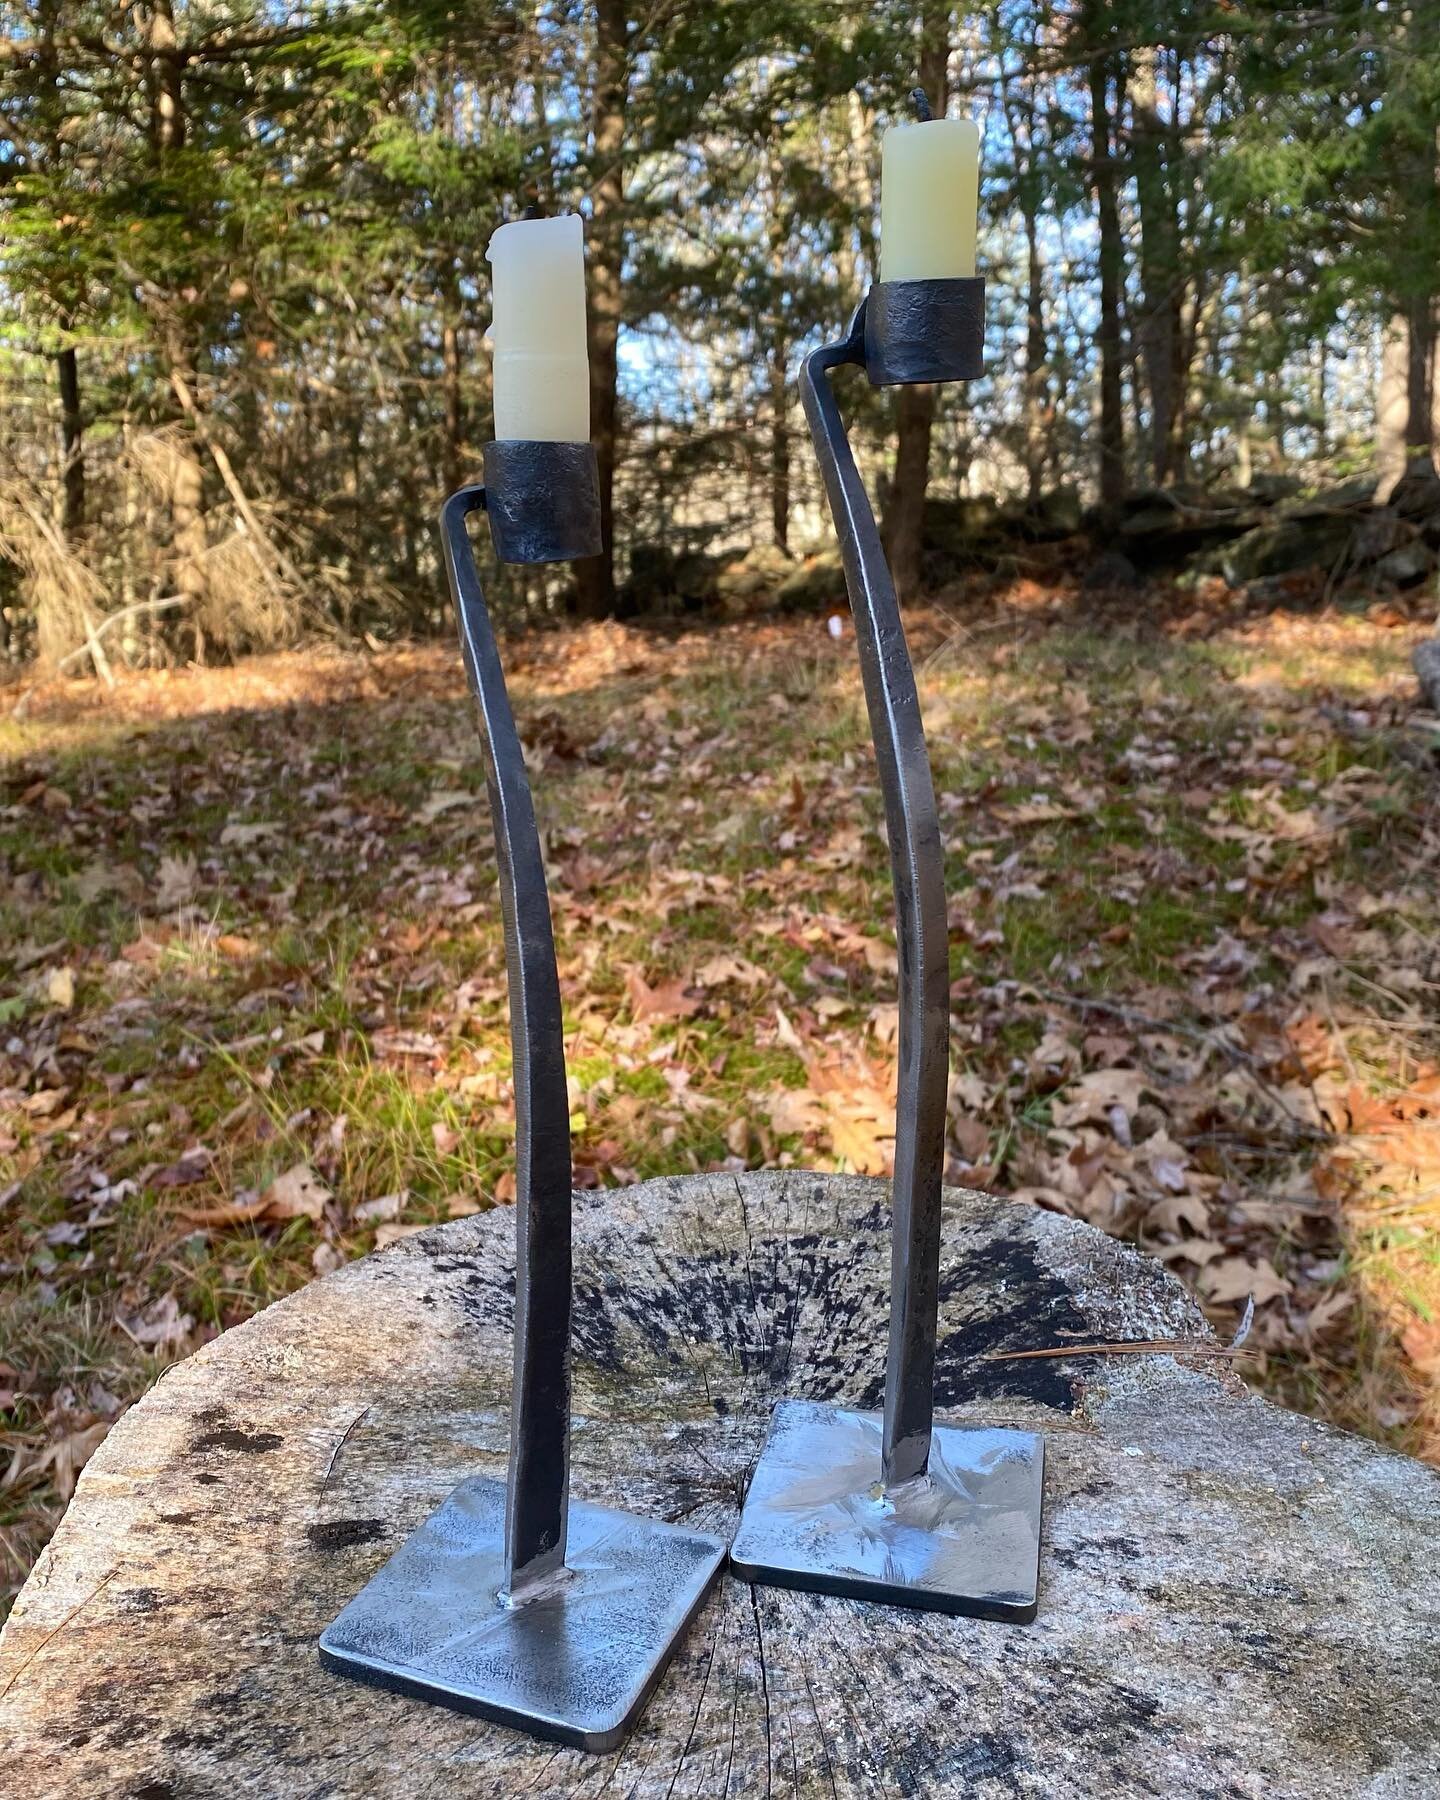 If you live in Maine you get used to power outages&hellip; and having candles are a must! Get ready for winter with these hand-forged steel candle sticks from one of our newest members and metal worker, Hilary Olson of @forgeintheferns. Hilary will h